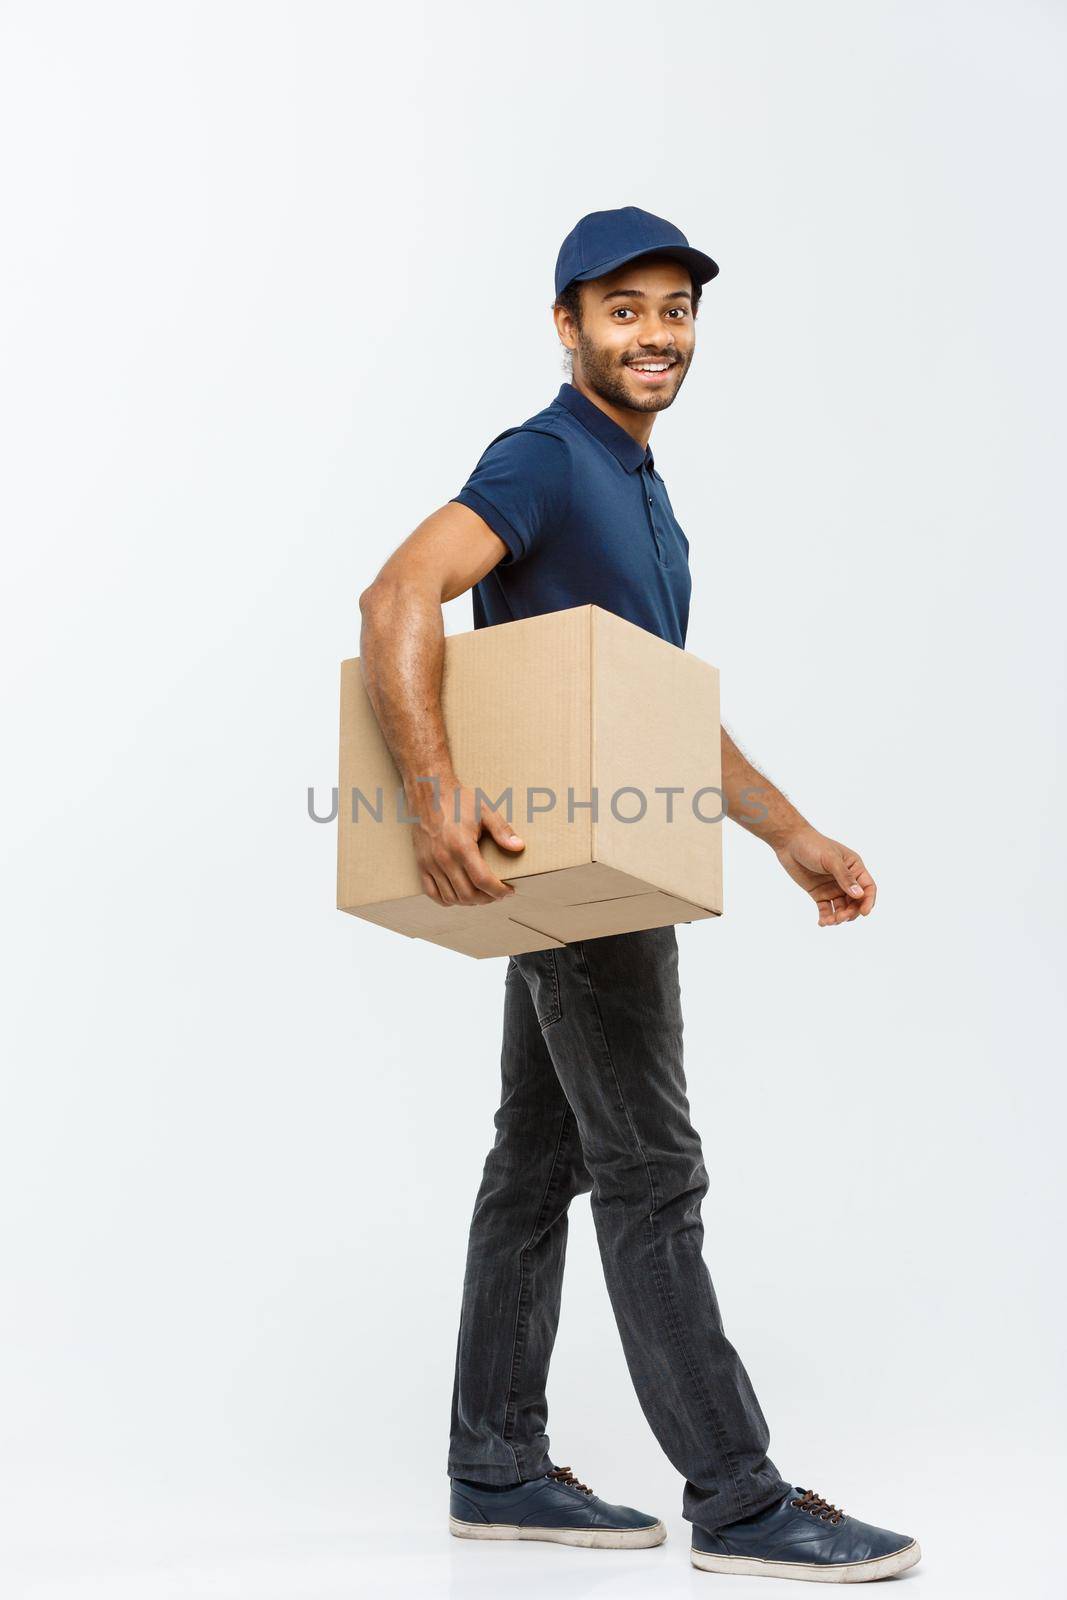 Delivery Concept - Portrait of Happy African American delivery man in blue cloth walking to send a box package to customer. Isolated on Grey studio Background. Copy Space